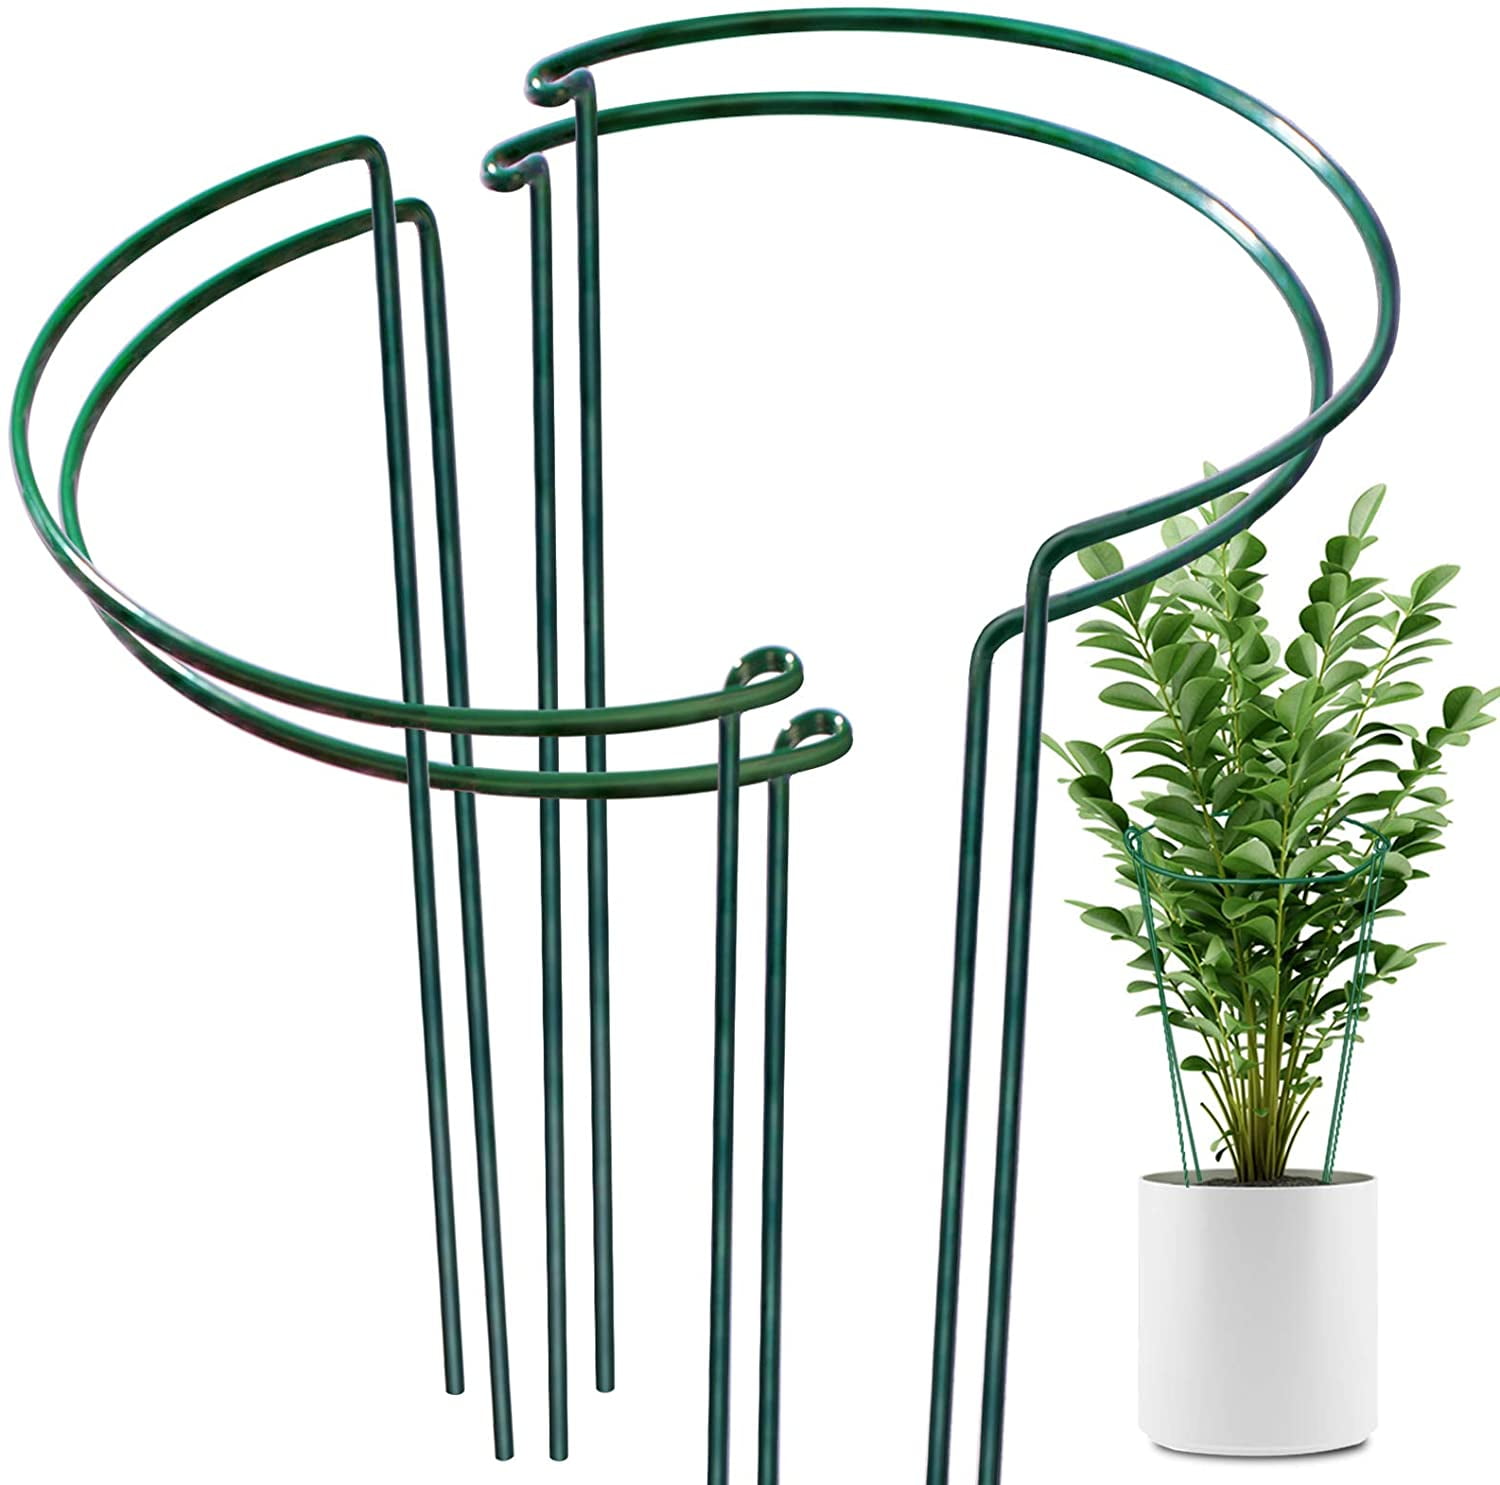 8pcs Metal Plant Supports Kit Stake Half Round Garden Plant Flower Support Set 